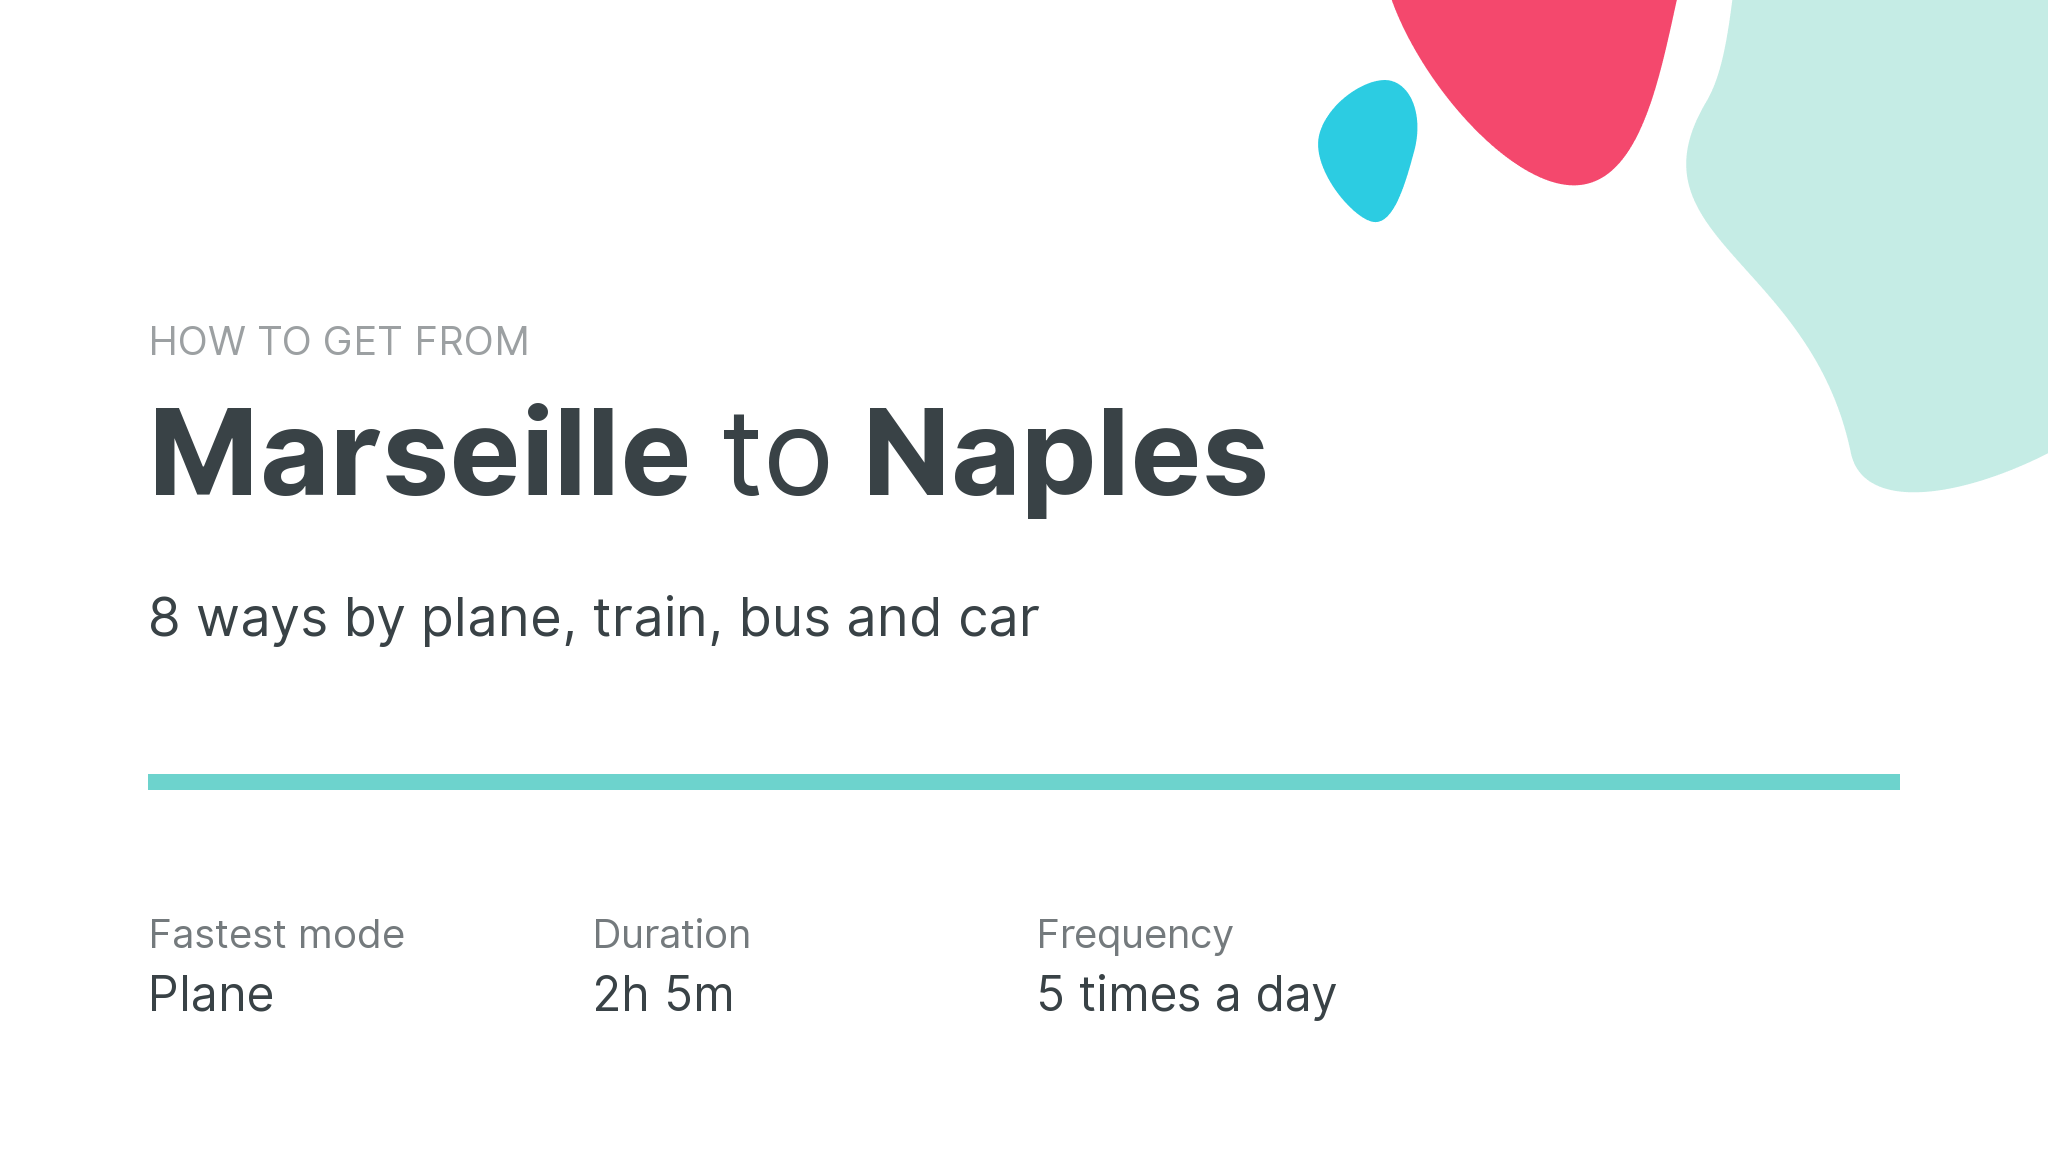 How do I get from Marseille to Naples